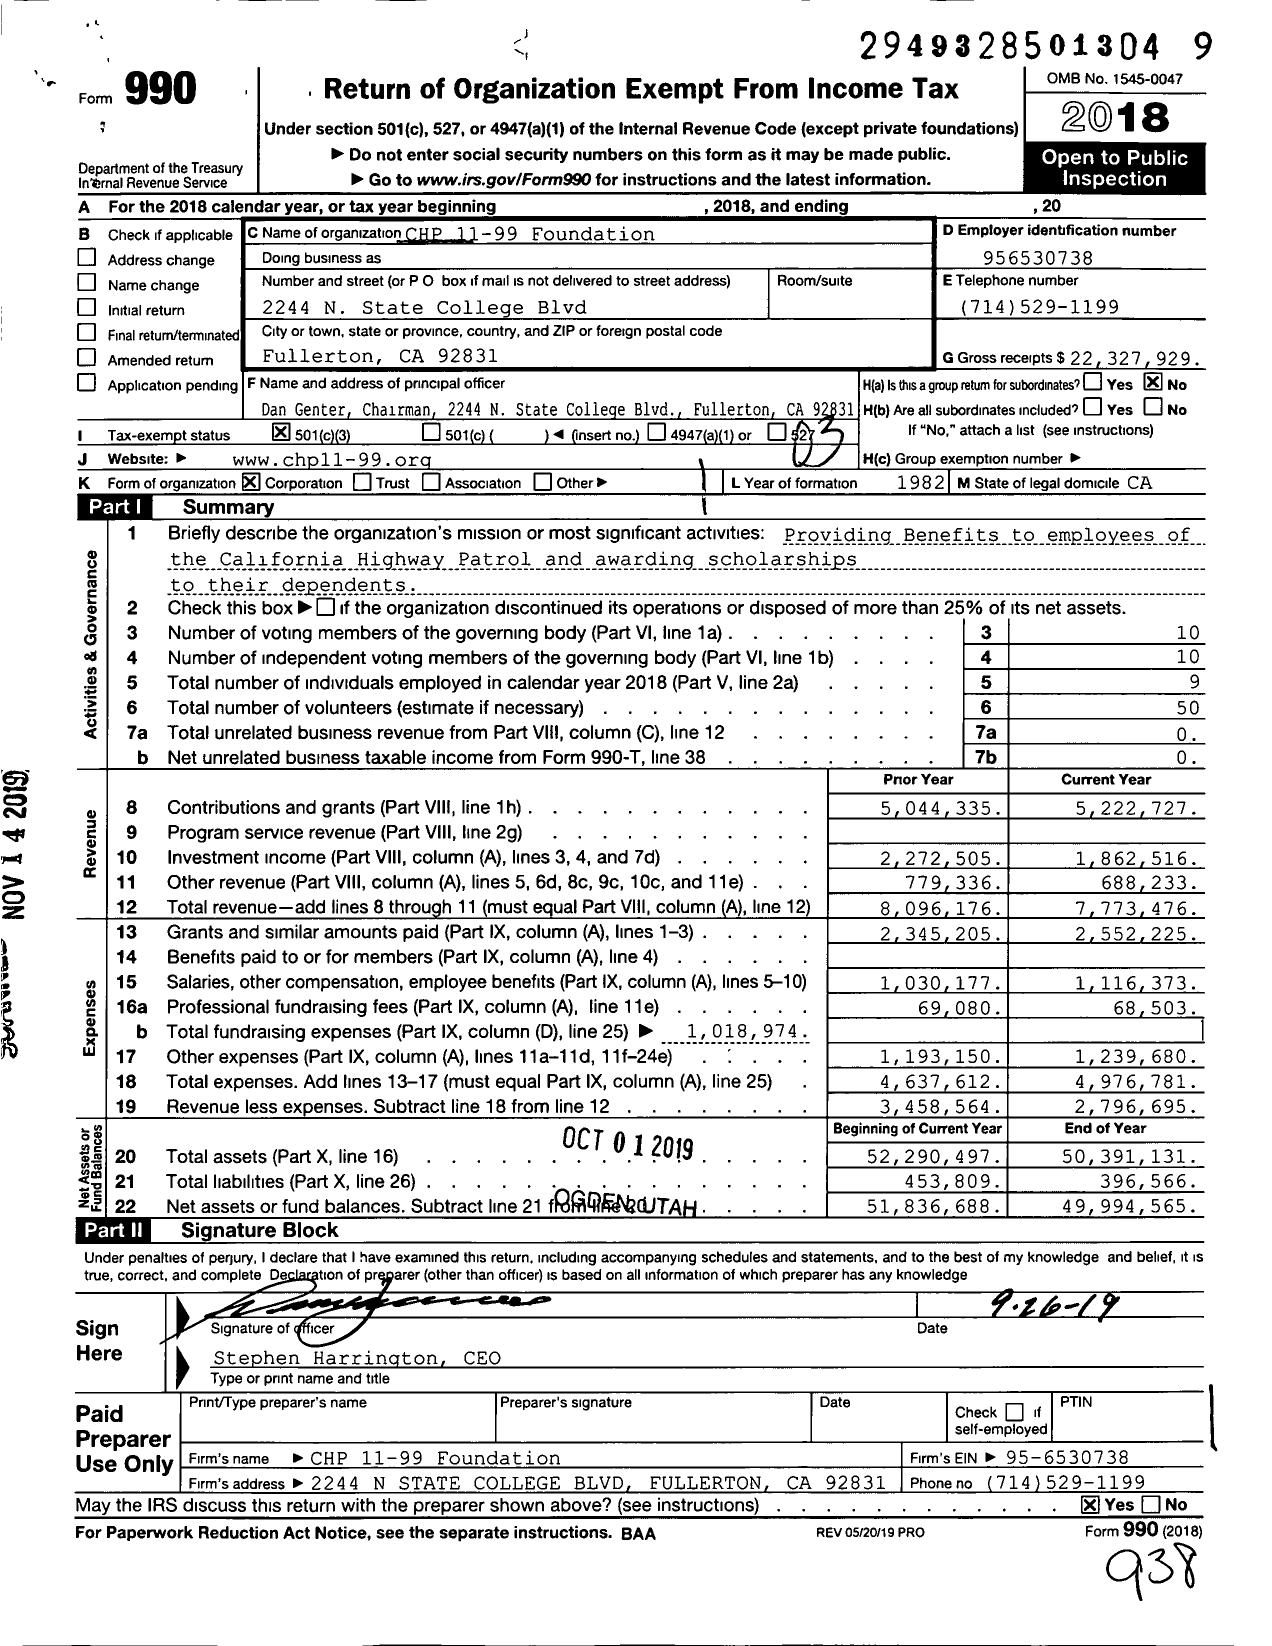 Image of first page of 2018 Form 990 for California Hwy Patrol 11-99 Fndt (CHP)